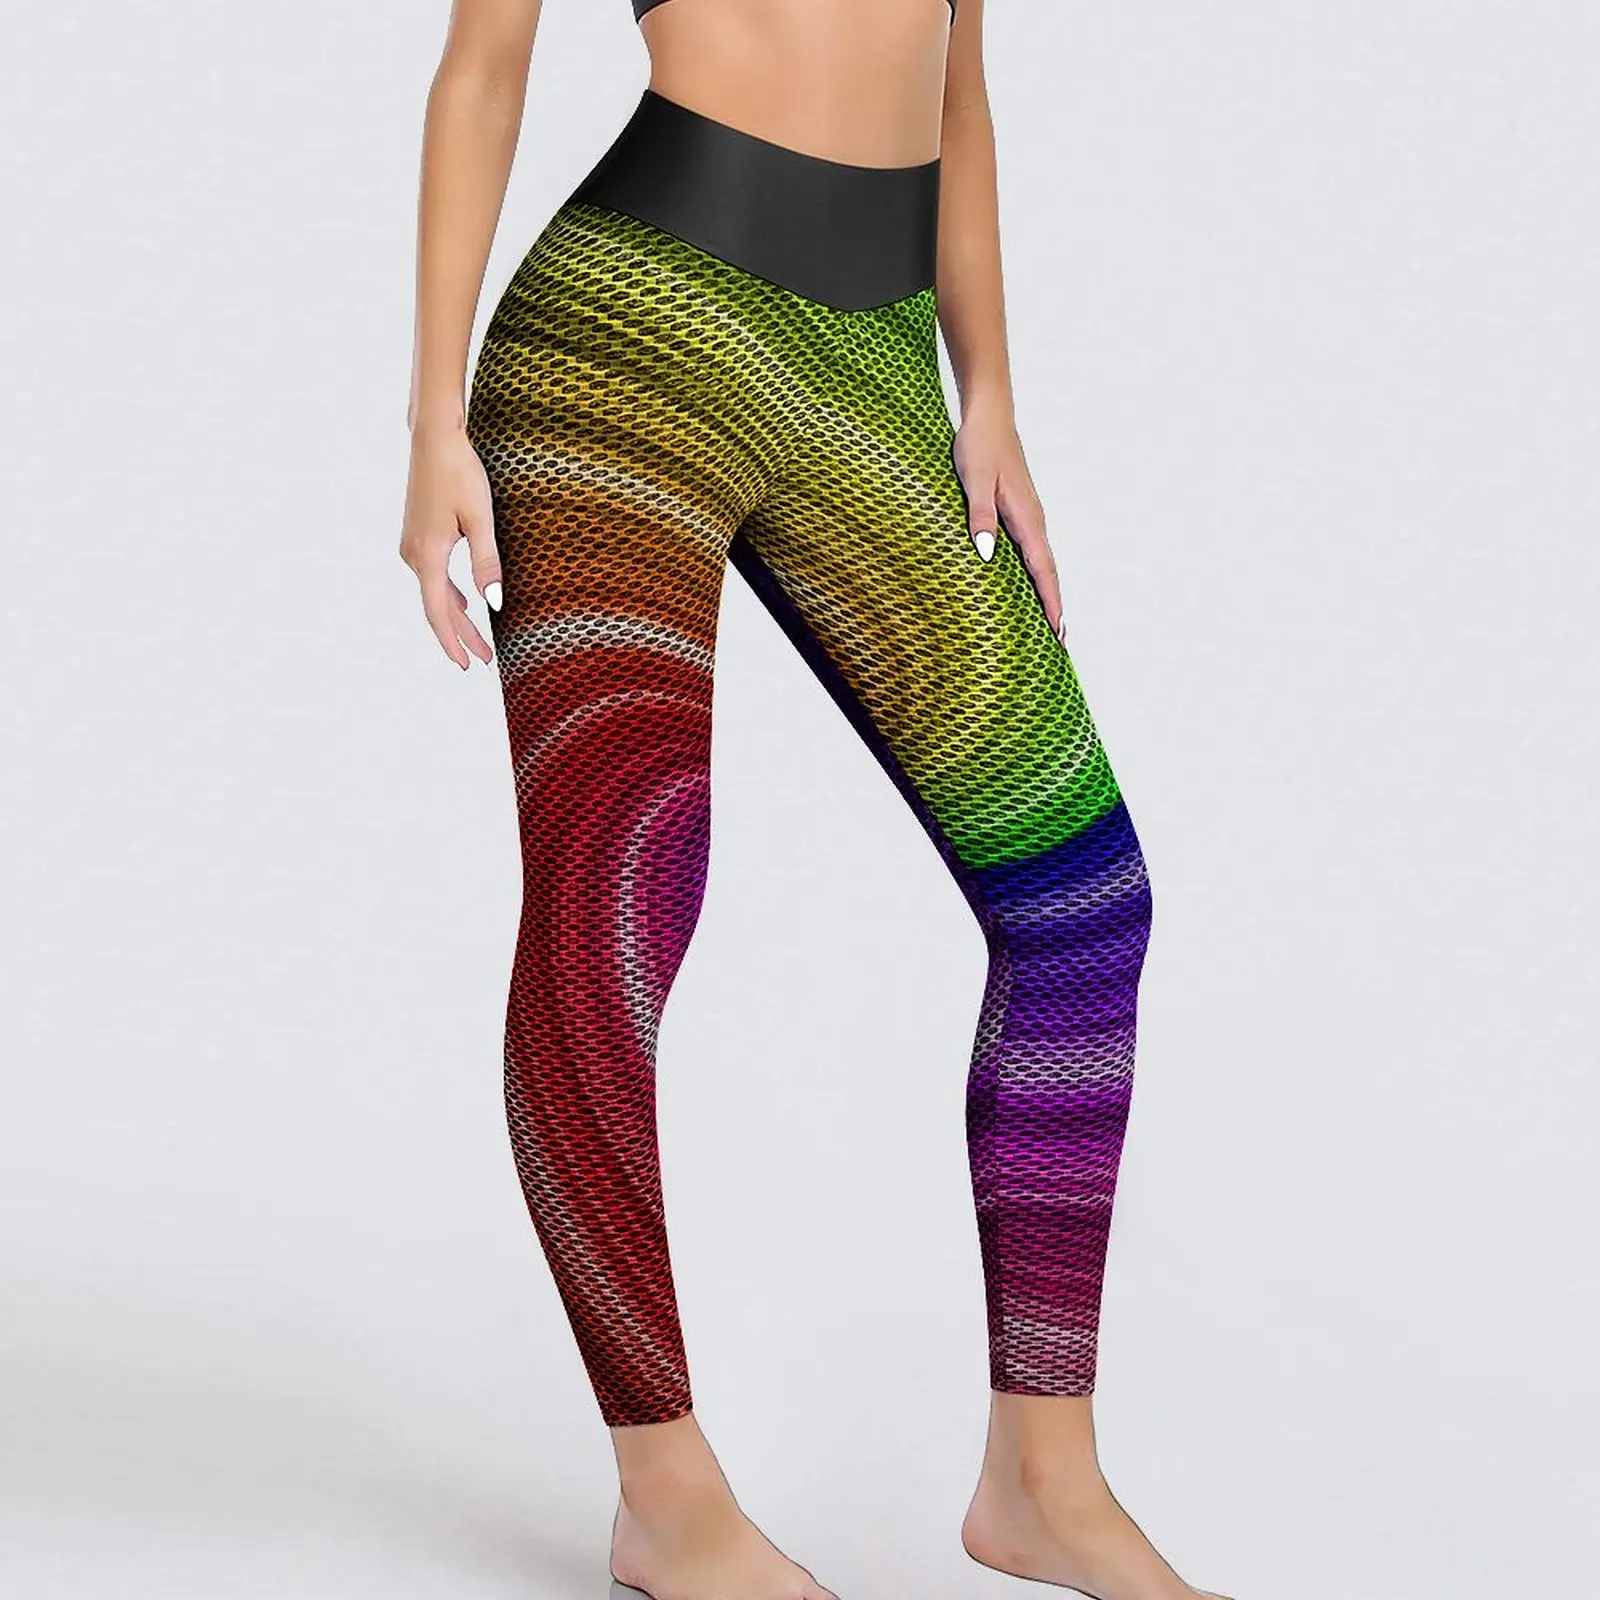 Colorful Tie Dye Yoga Pants Sexy Rainbow Swirl Art Graphic Leggings Push Up Work Out Leggins Fashion Quick-Dry Sports Tights